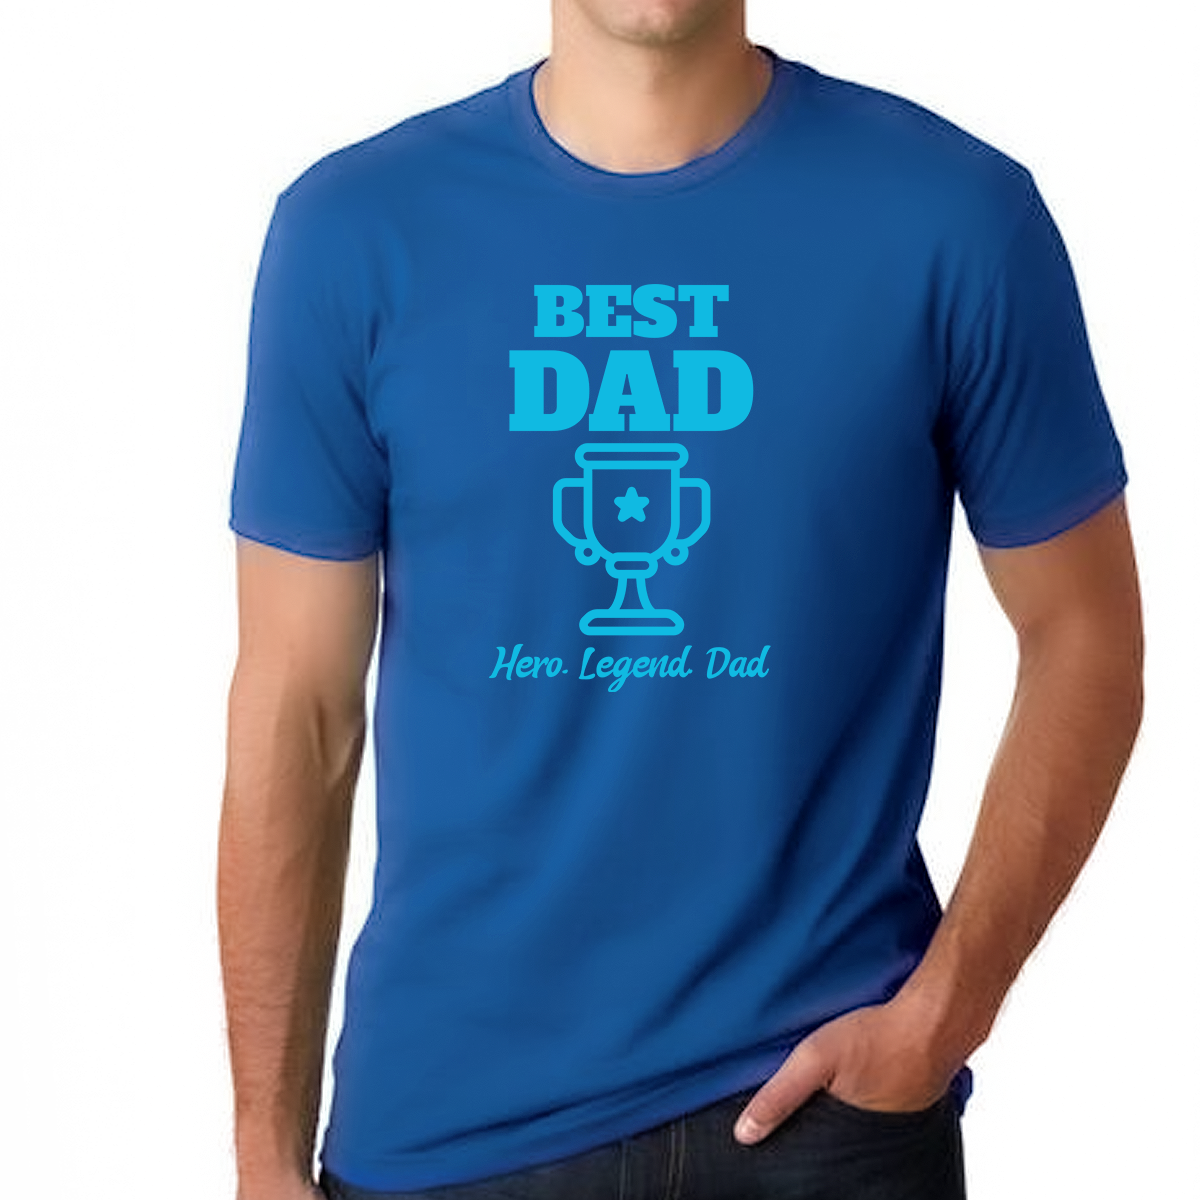 Dad Shirts for Men Fathers Day Shirt Best Dad Shirt Papa Shirt Fathers Day Gifts